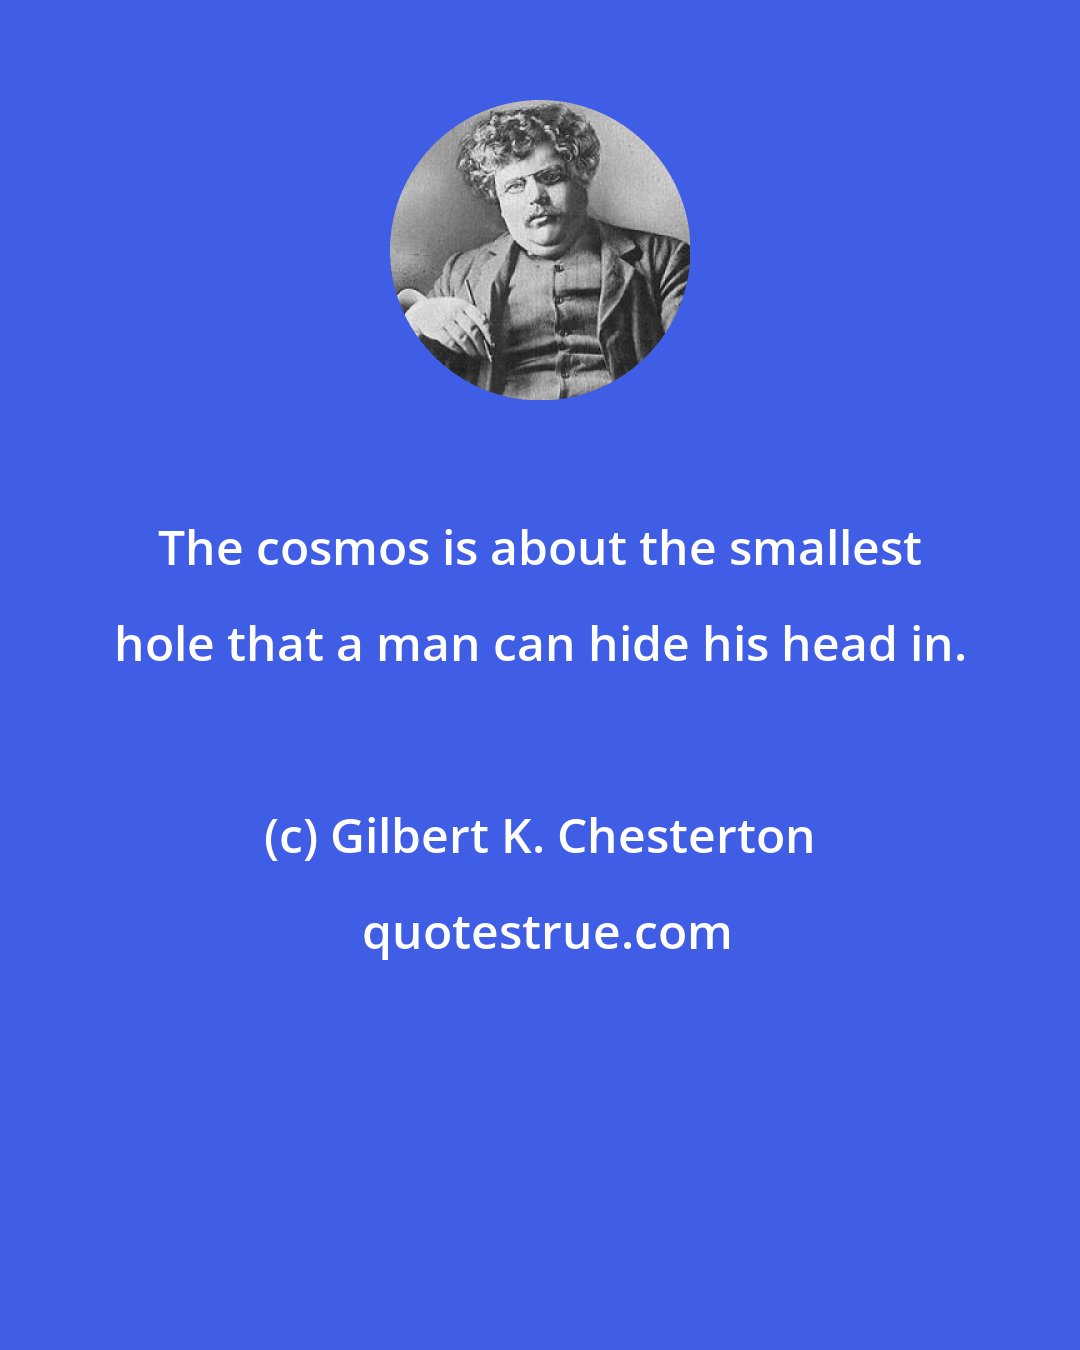 Gilbert K. Chesterton: The cosmos is about the smallest hole that a man can hide his head in.